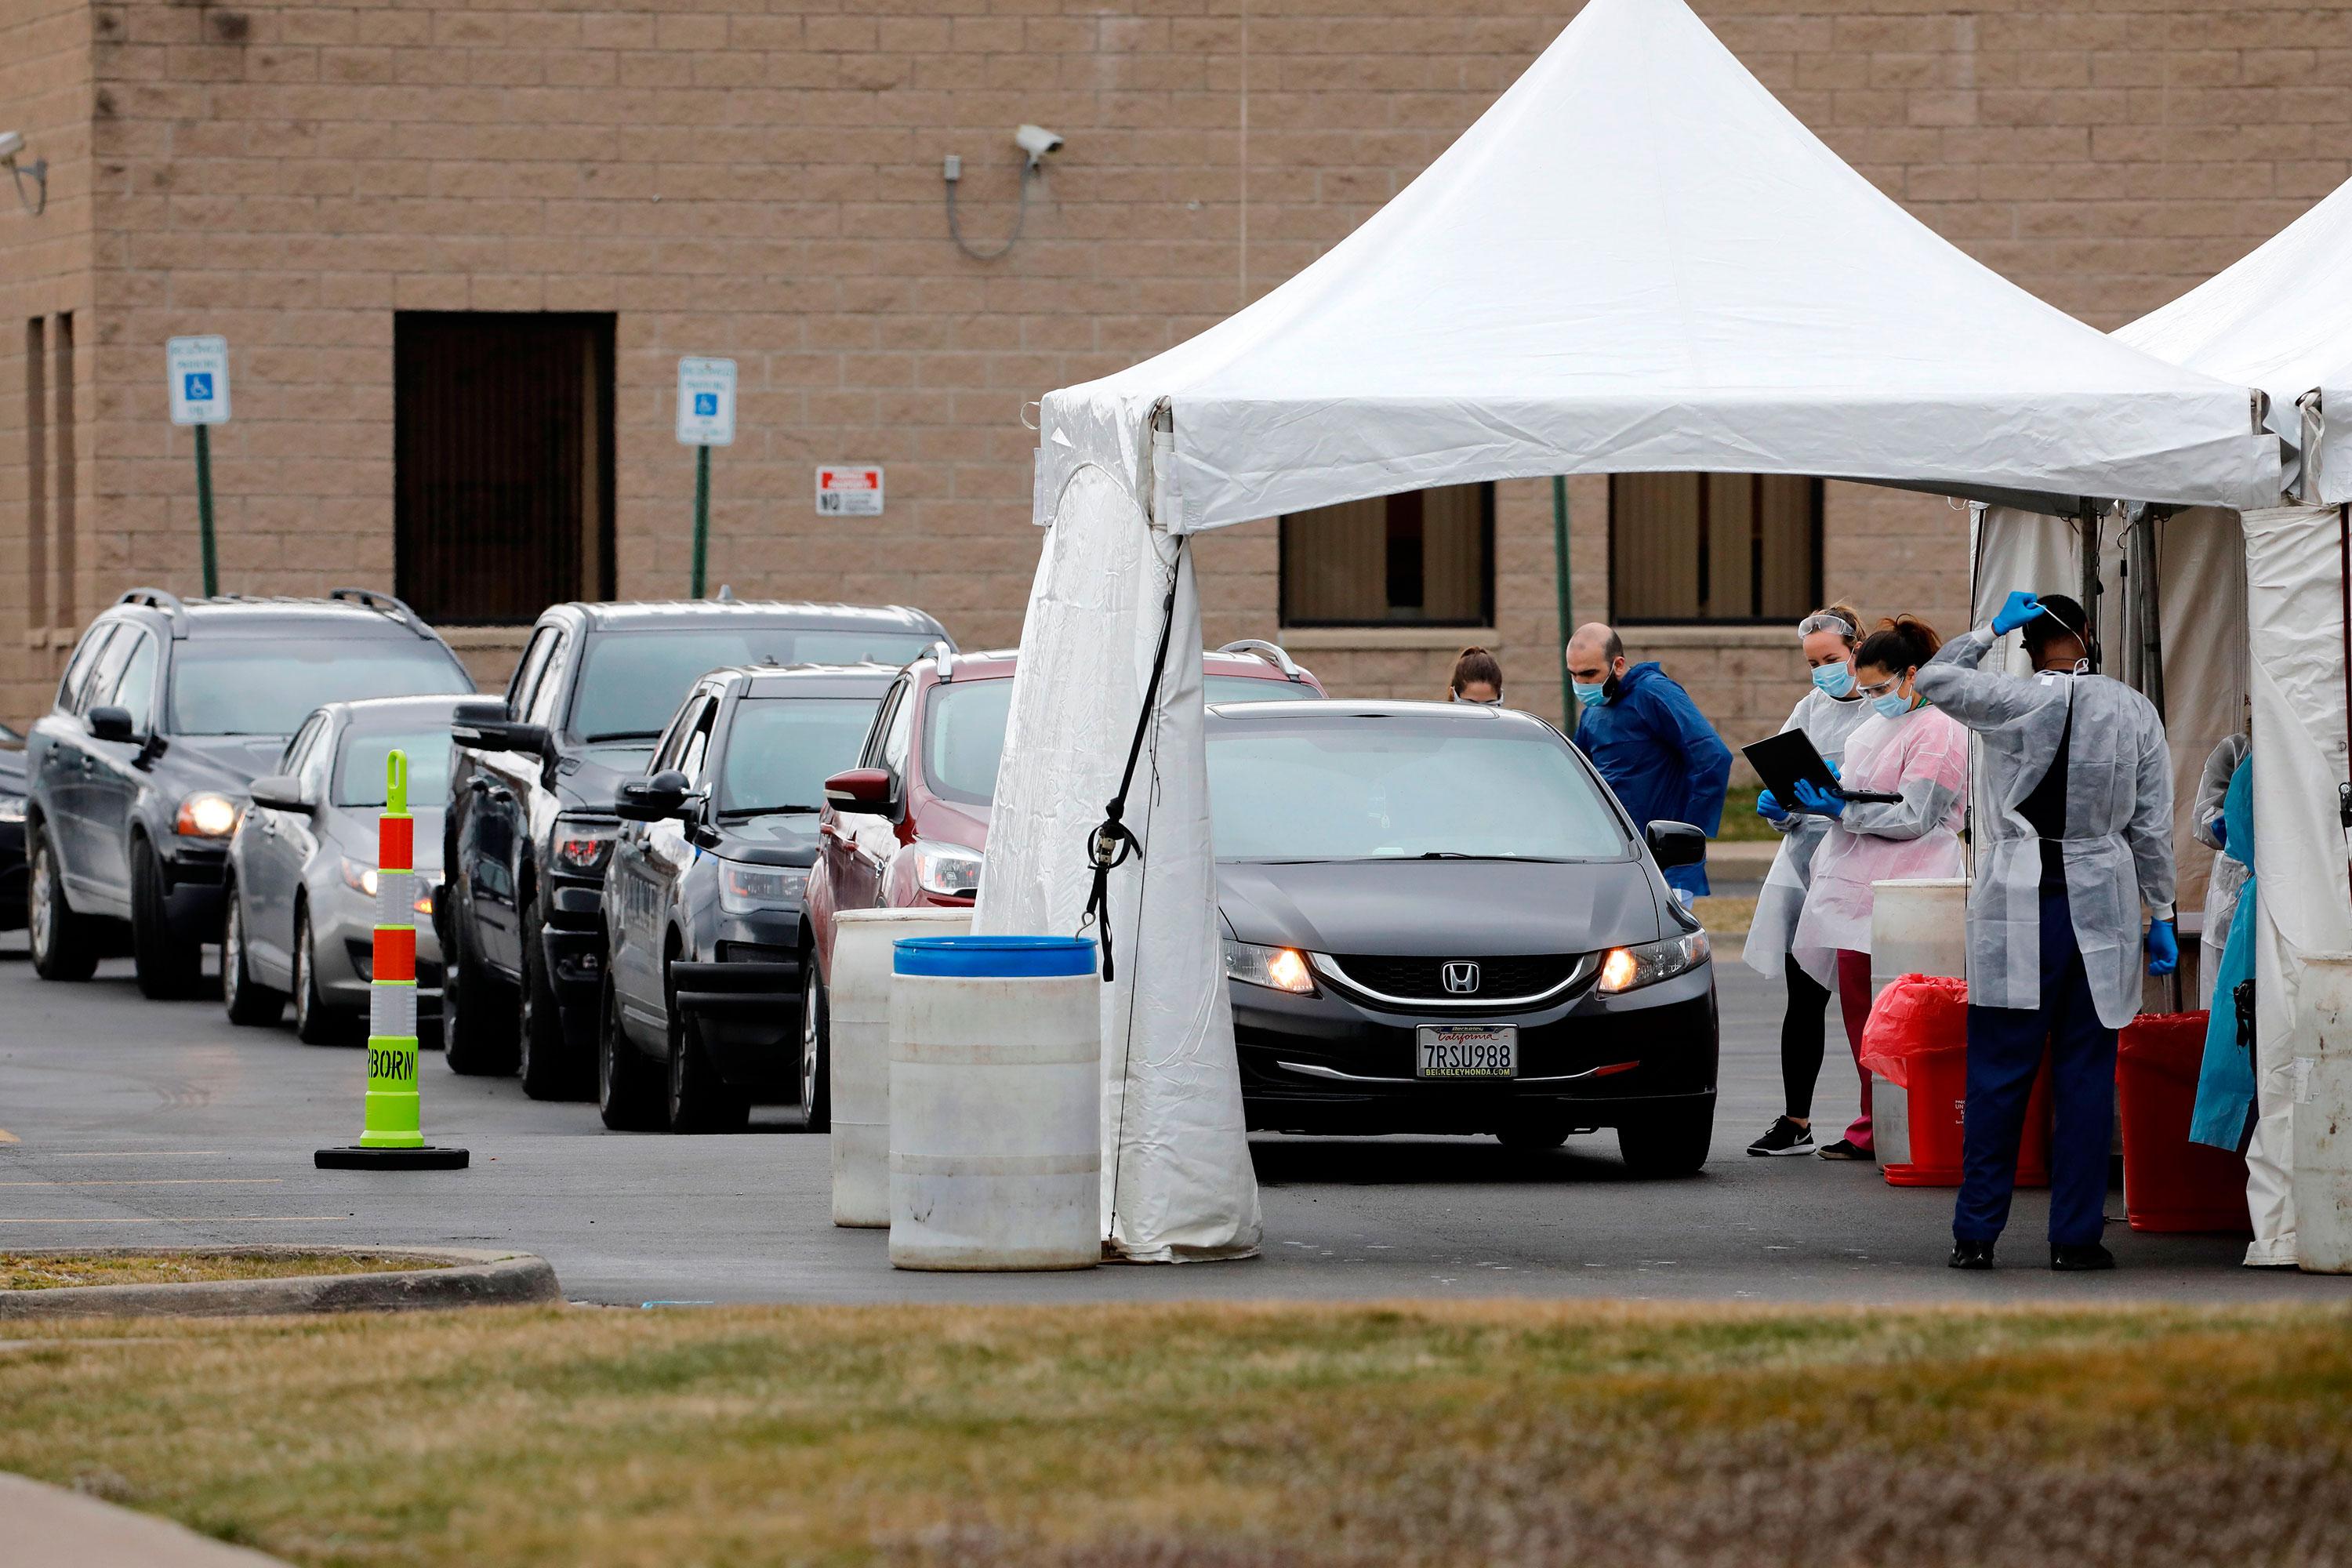 People are tested for coronavirus in Dearborn, Michigan on March 26.